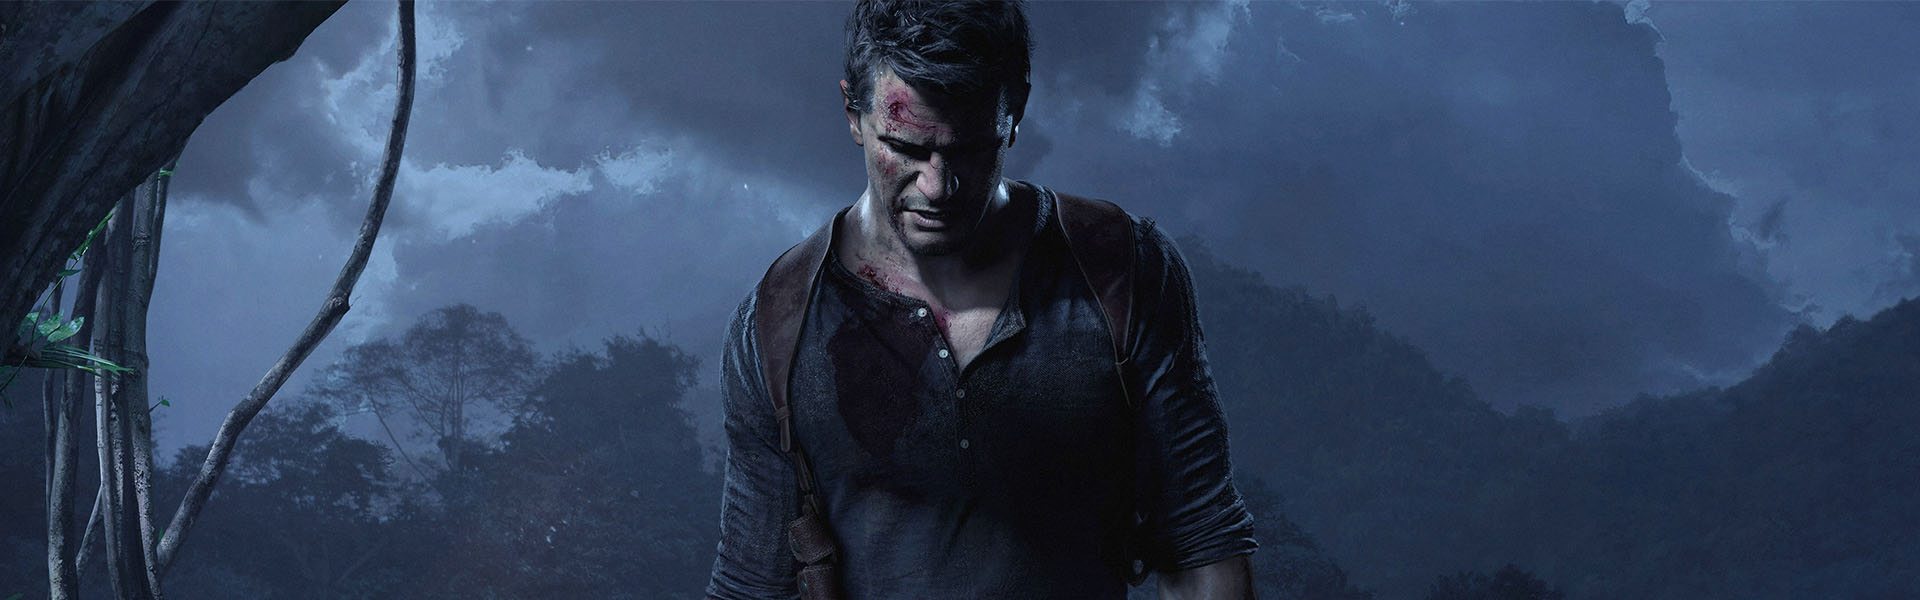 Uncharted 4: A Thief’s End Review 21